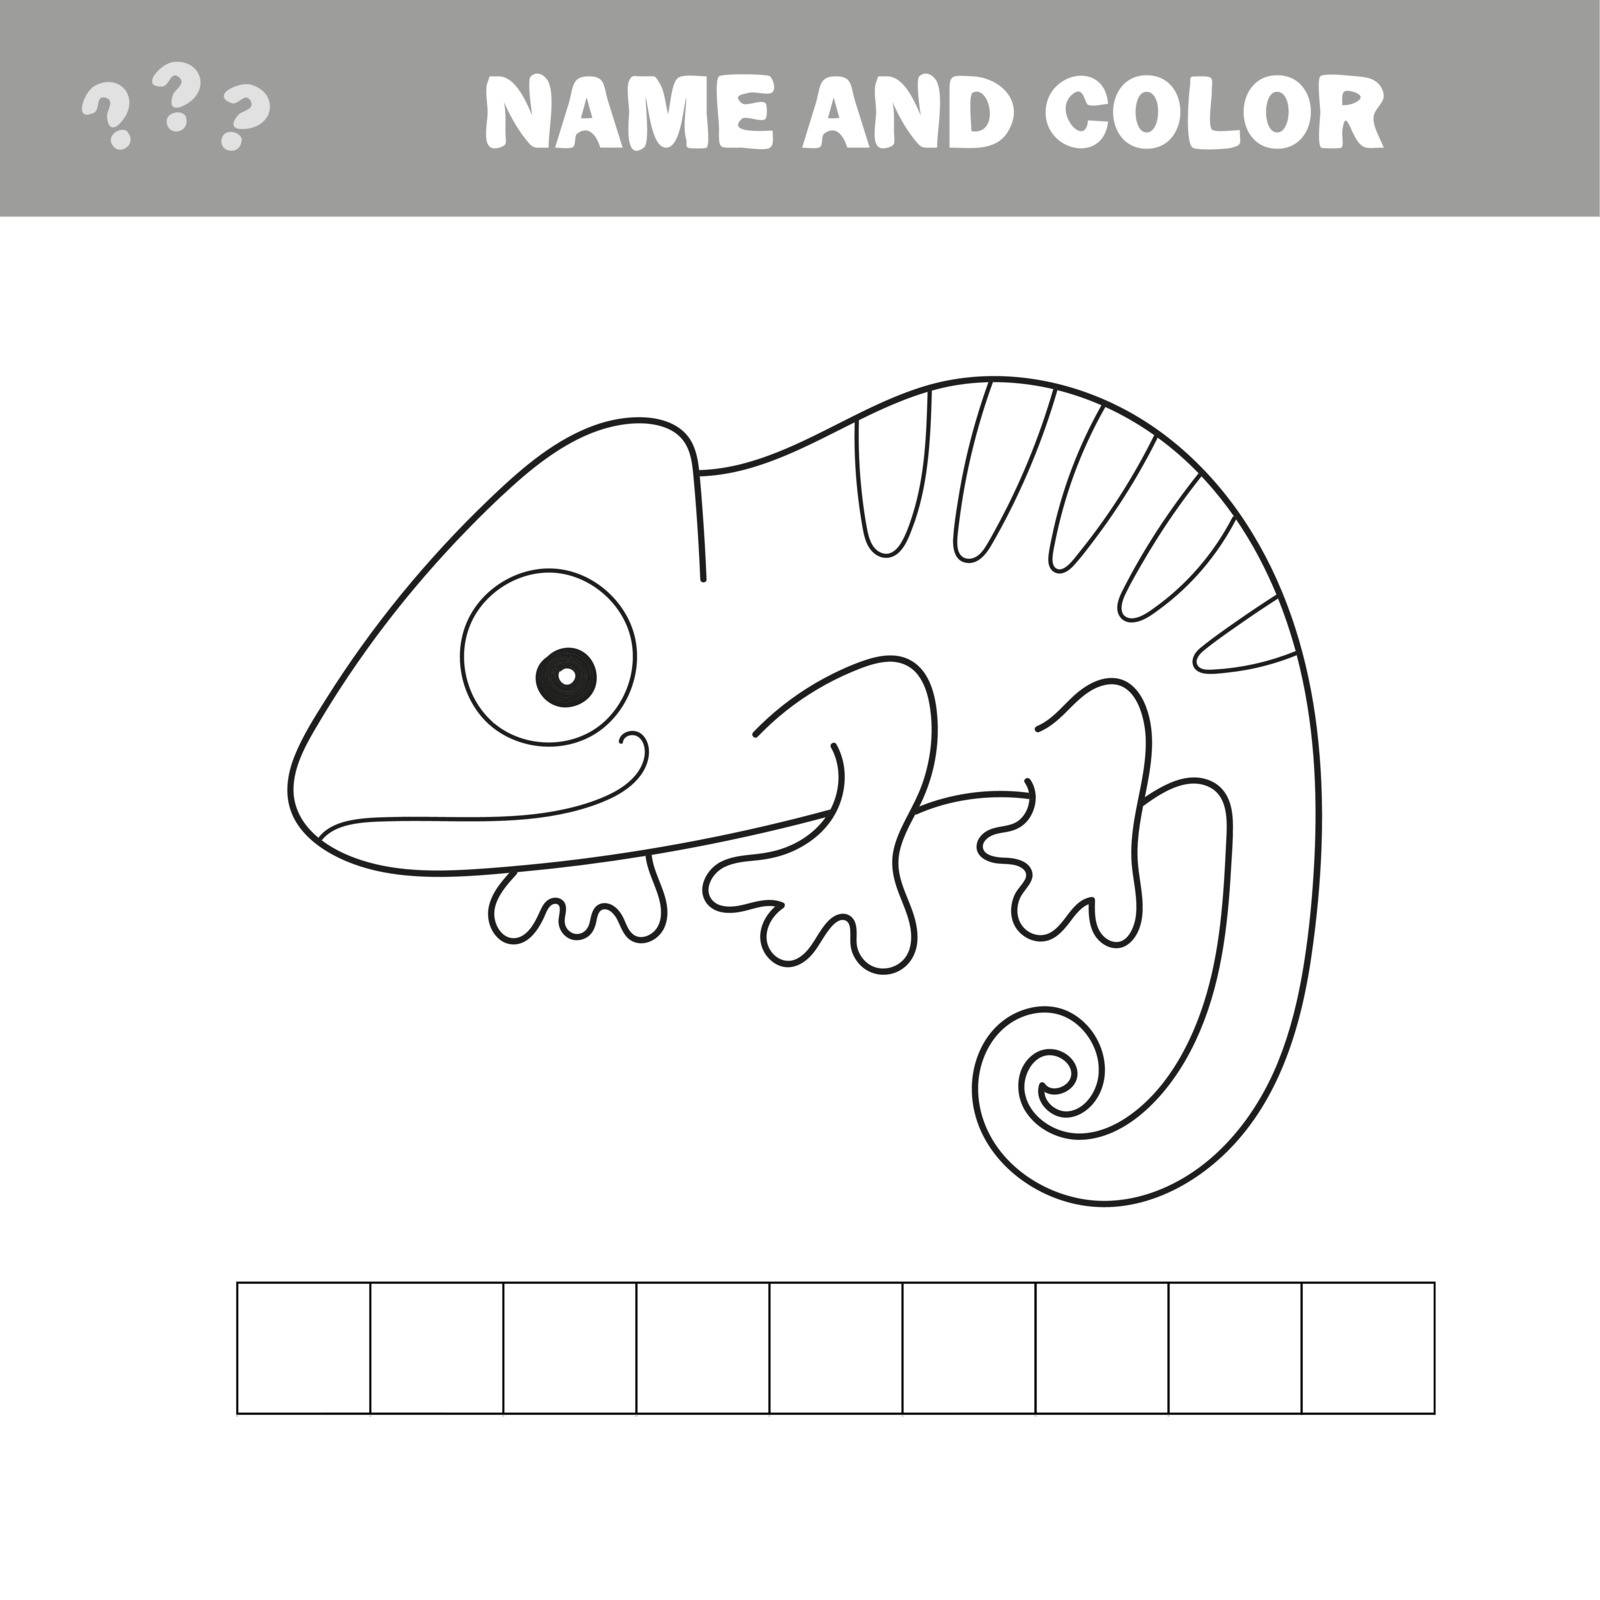 Iguana or chameleon to be colored. Coloring book for children. Visual game.